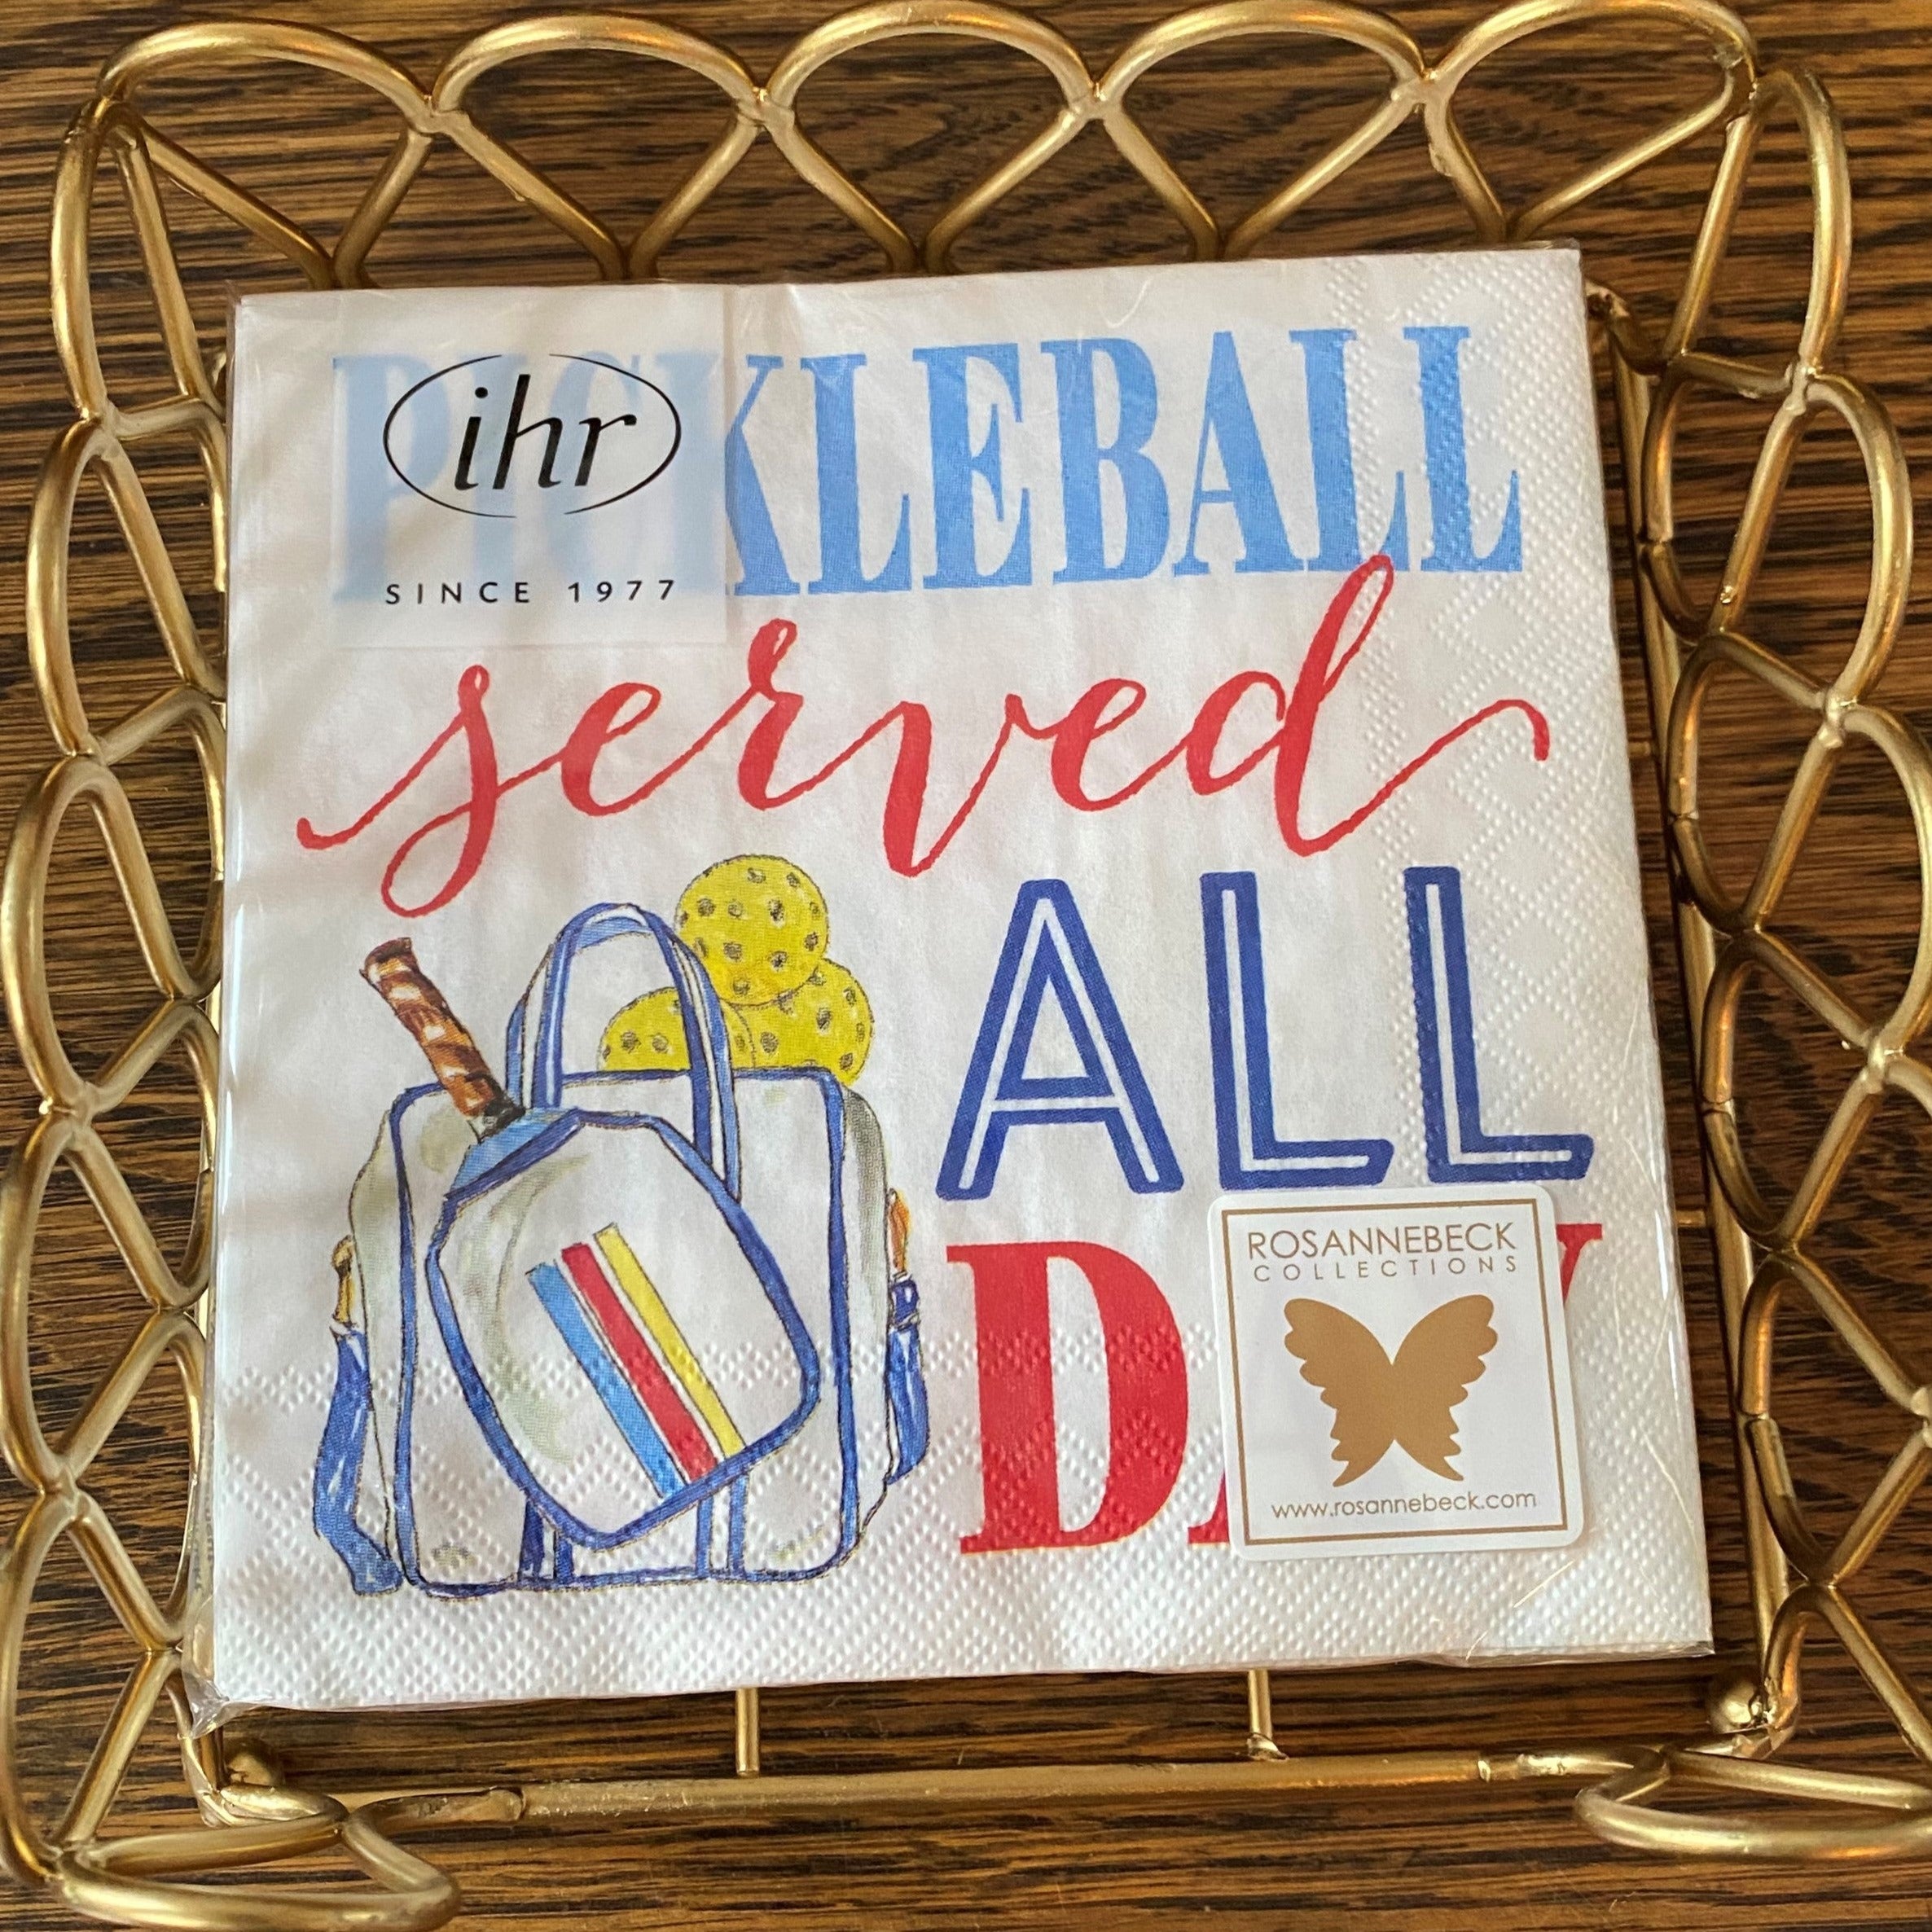 Pickleball themed cocktail napkins in red, blue and yellow.